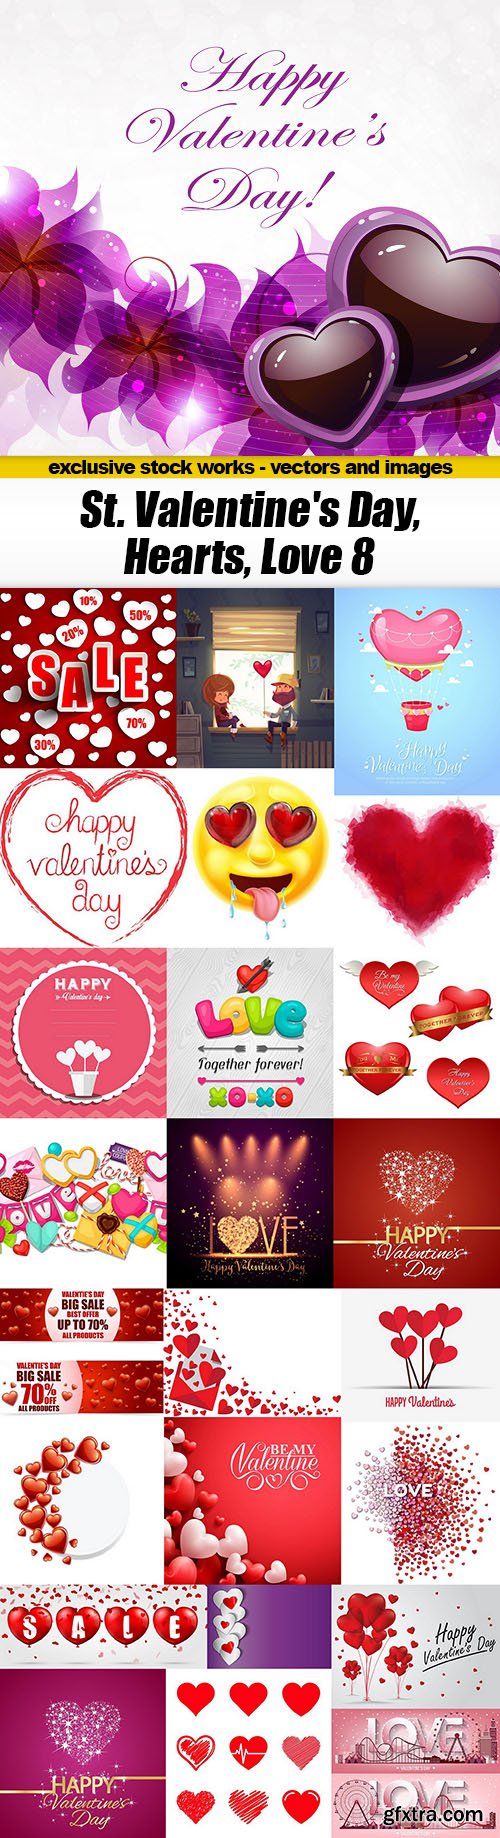 St. Valentine\'s Day, Hearts, Love #8, 25xEPS